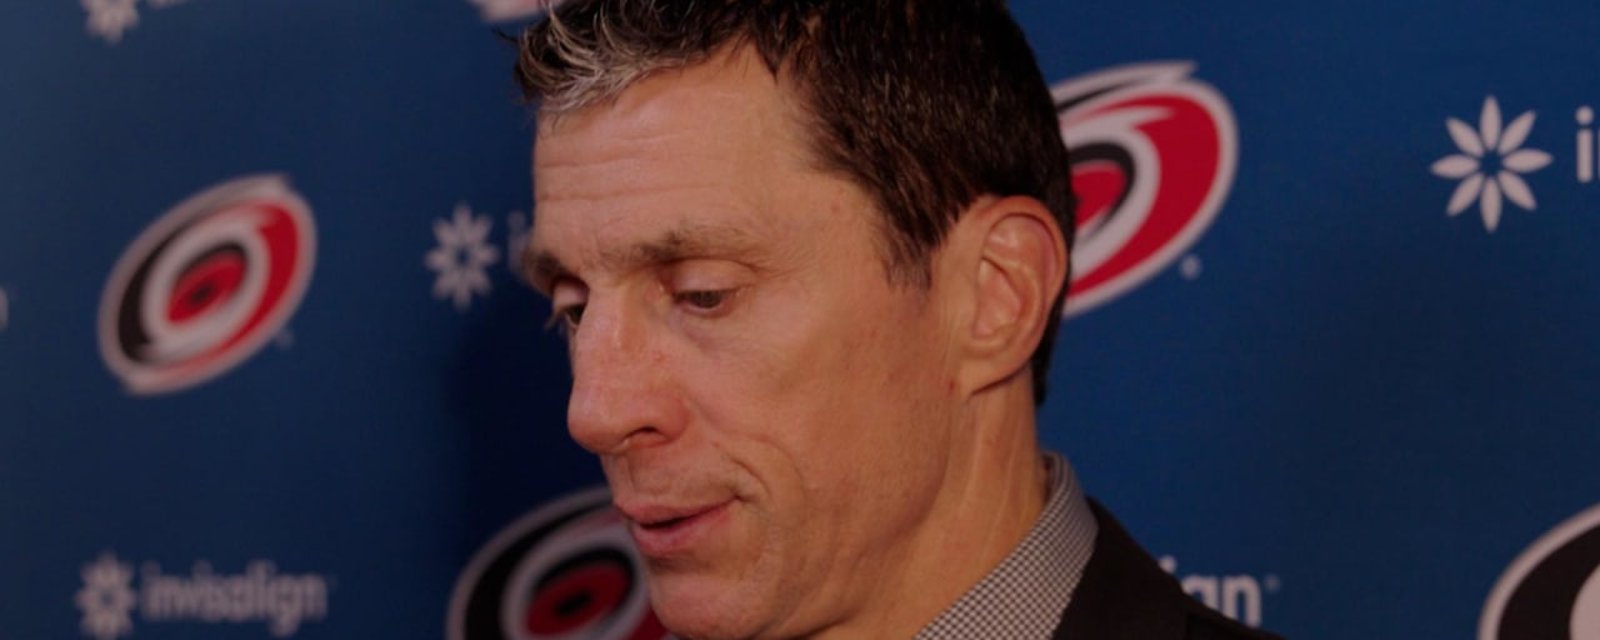 Horrible news shared by Rod Brind’Amour in Carolina